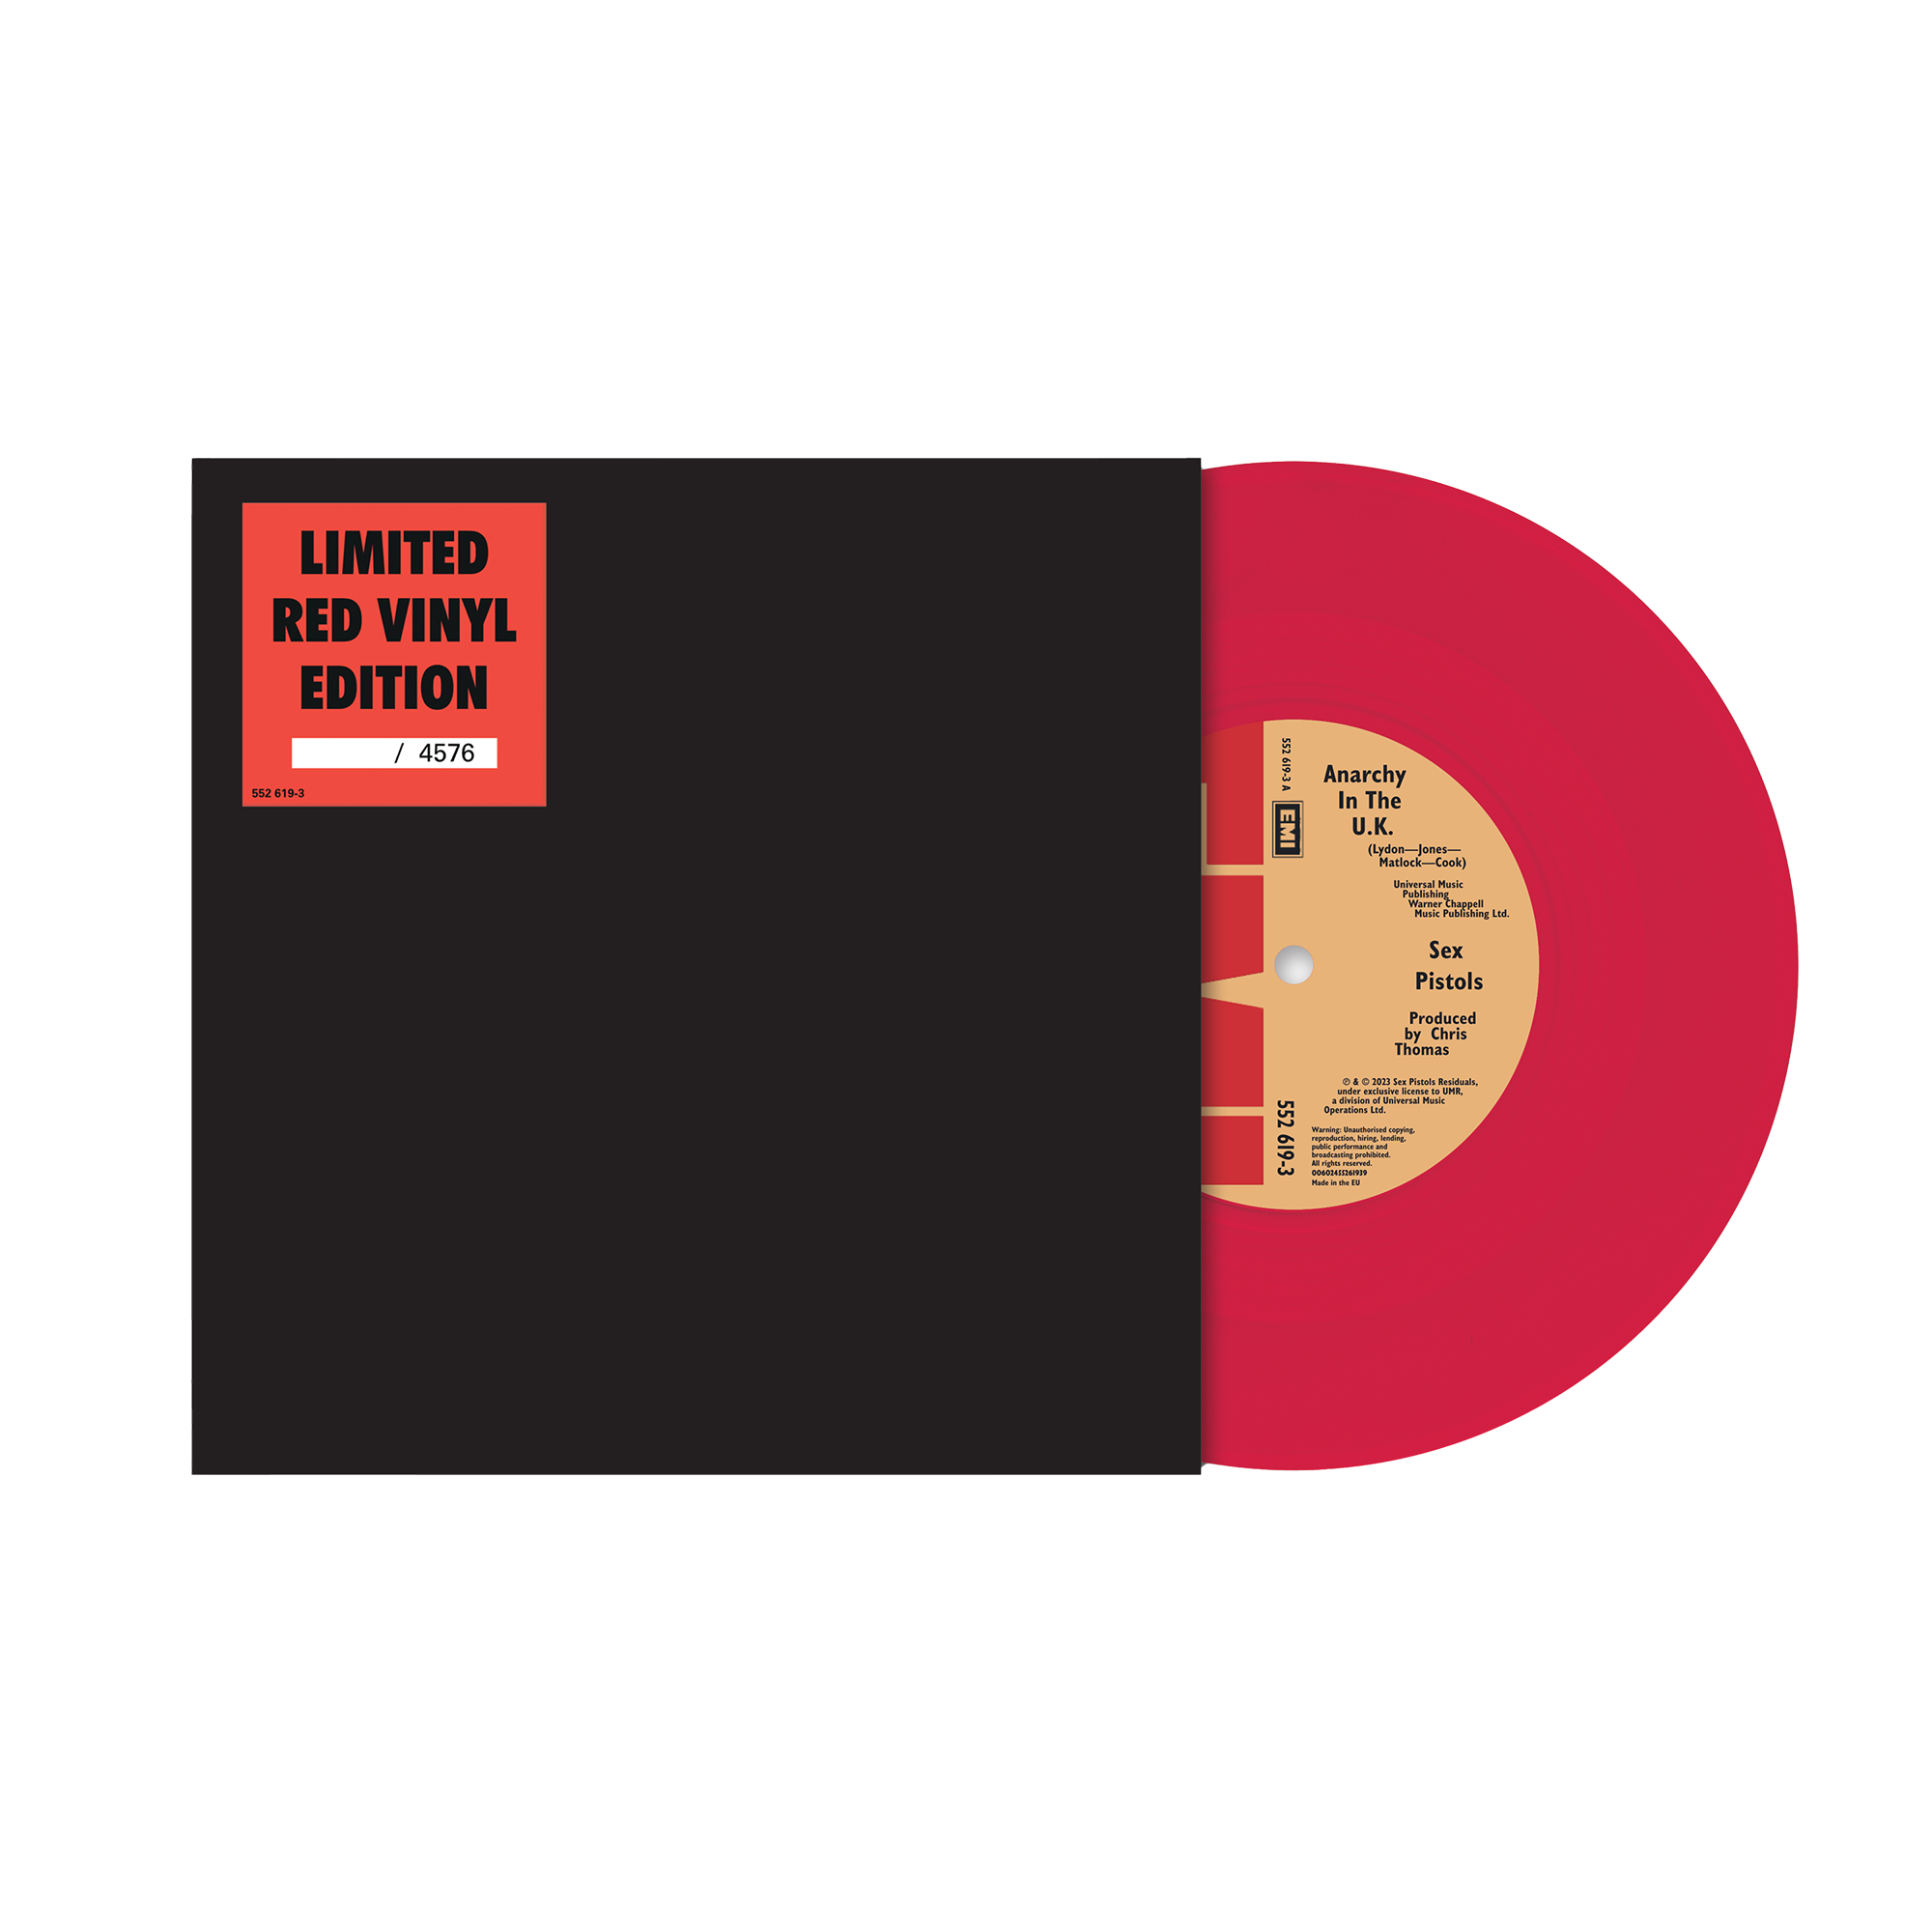 Sex Pistols - Anarchy in The UK: Exclusive Red Vinyl 7"